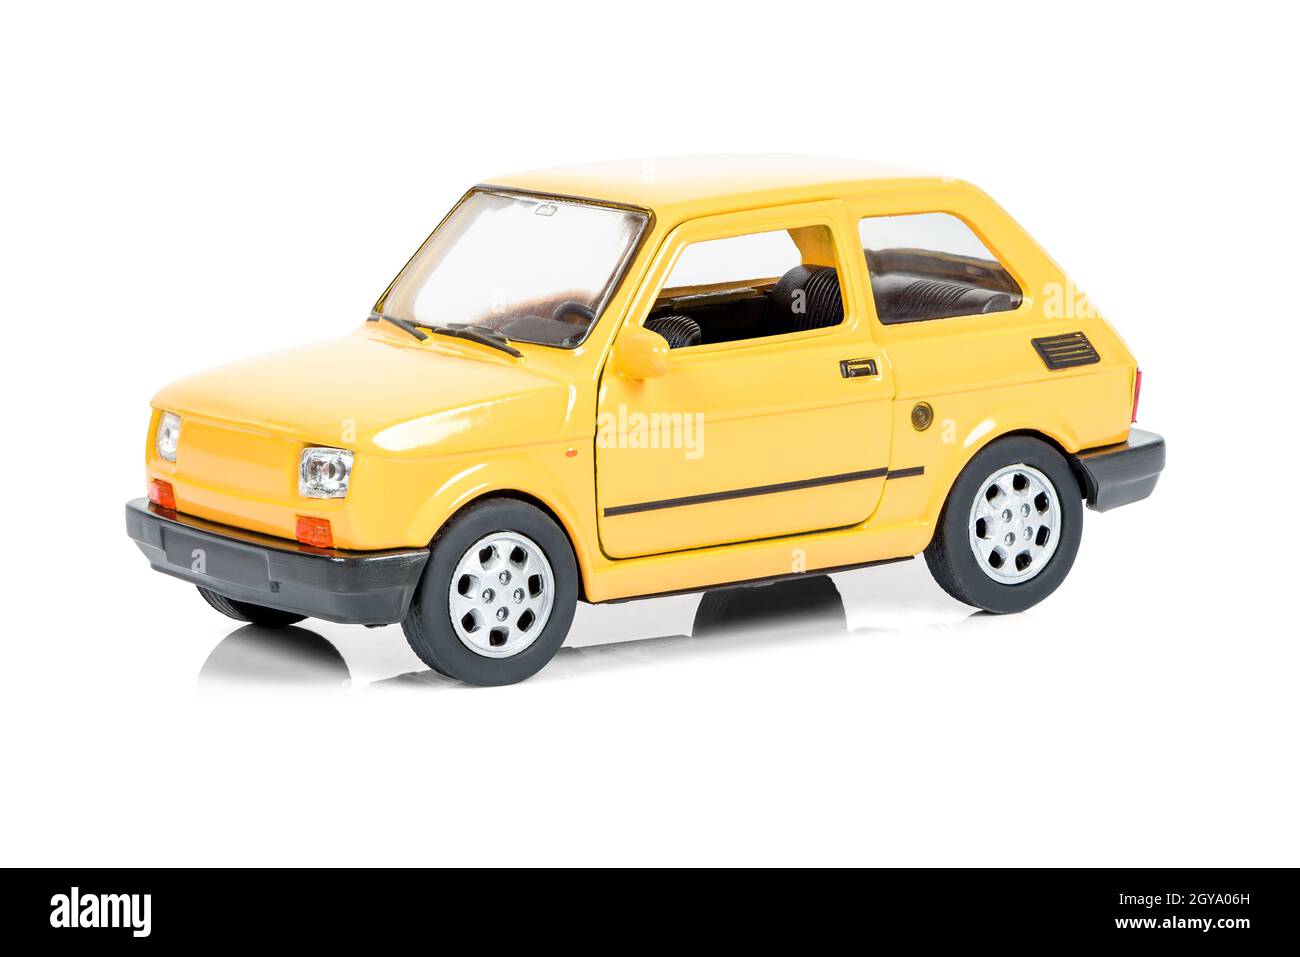 Vintage yellow toy car isolated on white background with clipping path Stock Photo